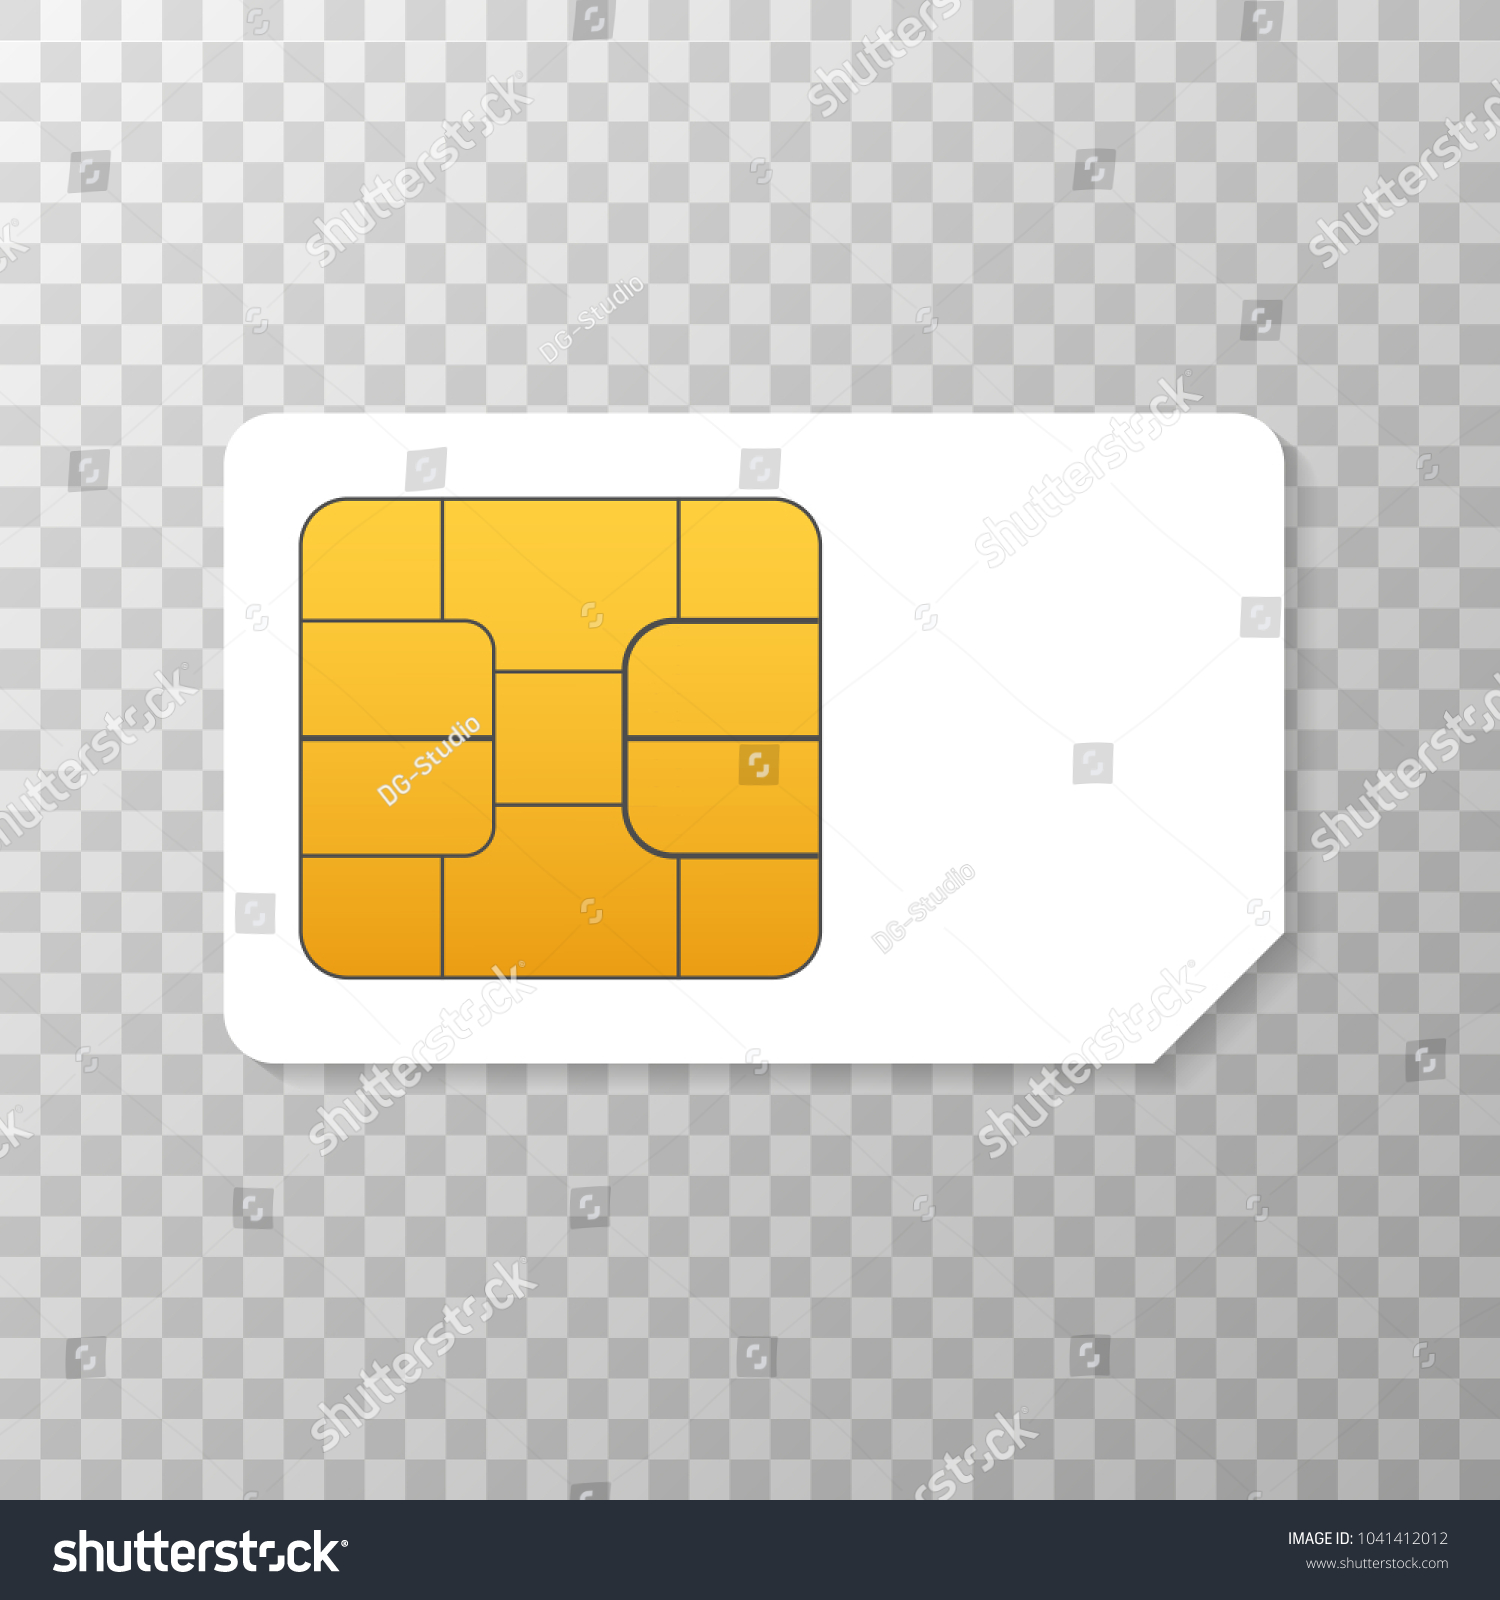 Vector Mobile Cellular Phone Sim Card Chip Isolated on Background. Vector stock illustration. #1041412012